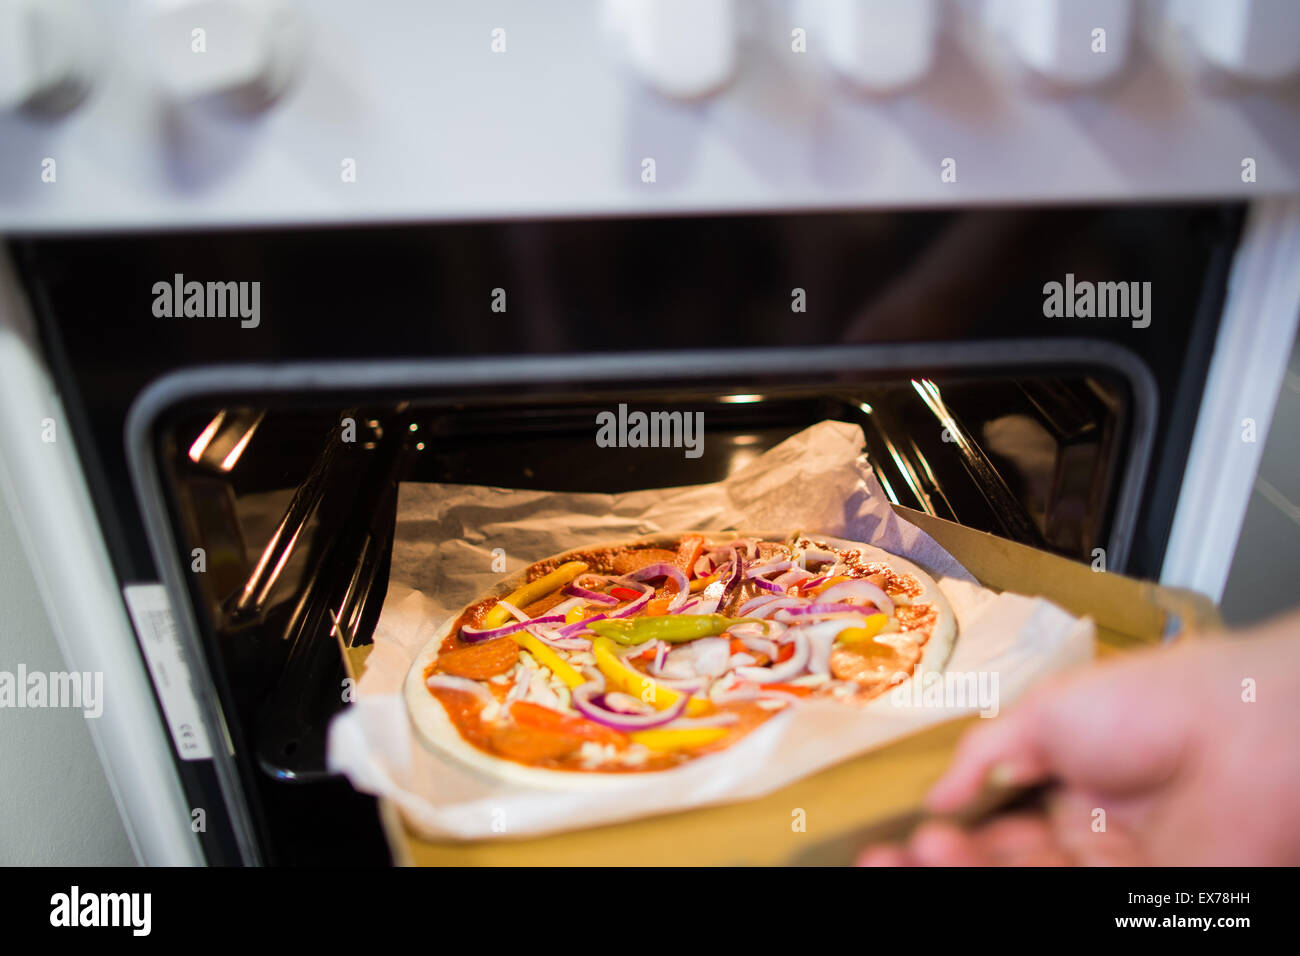 Bonn, Germany. 7th July, 2015. A raw pizza is put into the oven at the Vapiano headquaters in Bonn, Germany, 7 July 2015. The restaurant chain hopes in the future to deliver 'Homebaked Pizza' - pizza that the customer bakes in the oven themselves. Photo: Rolf Vennenbernd/dpa/Alamy Live News Stock Photo